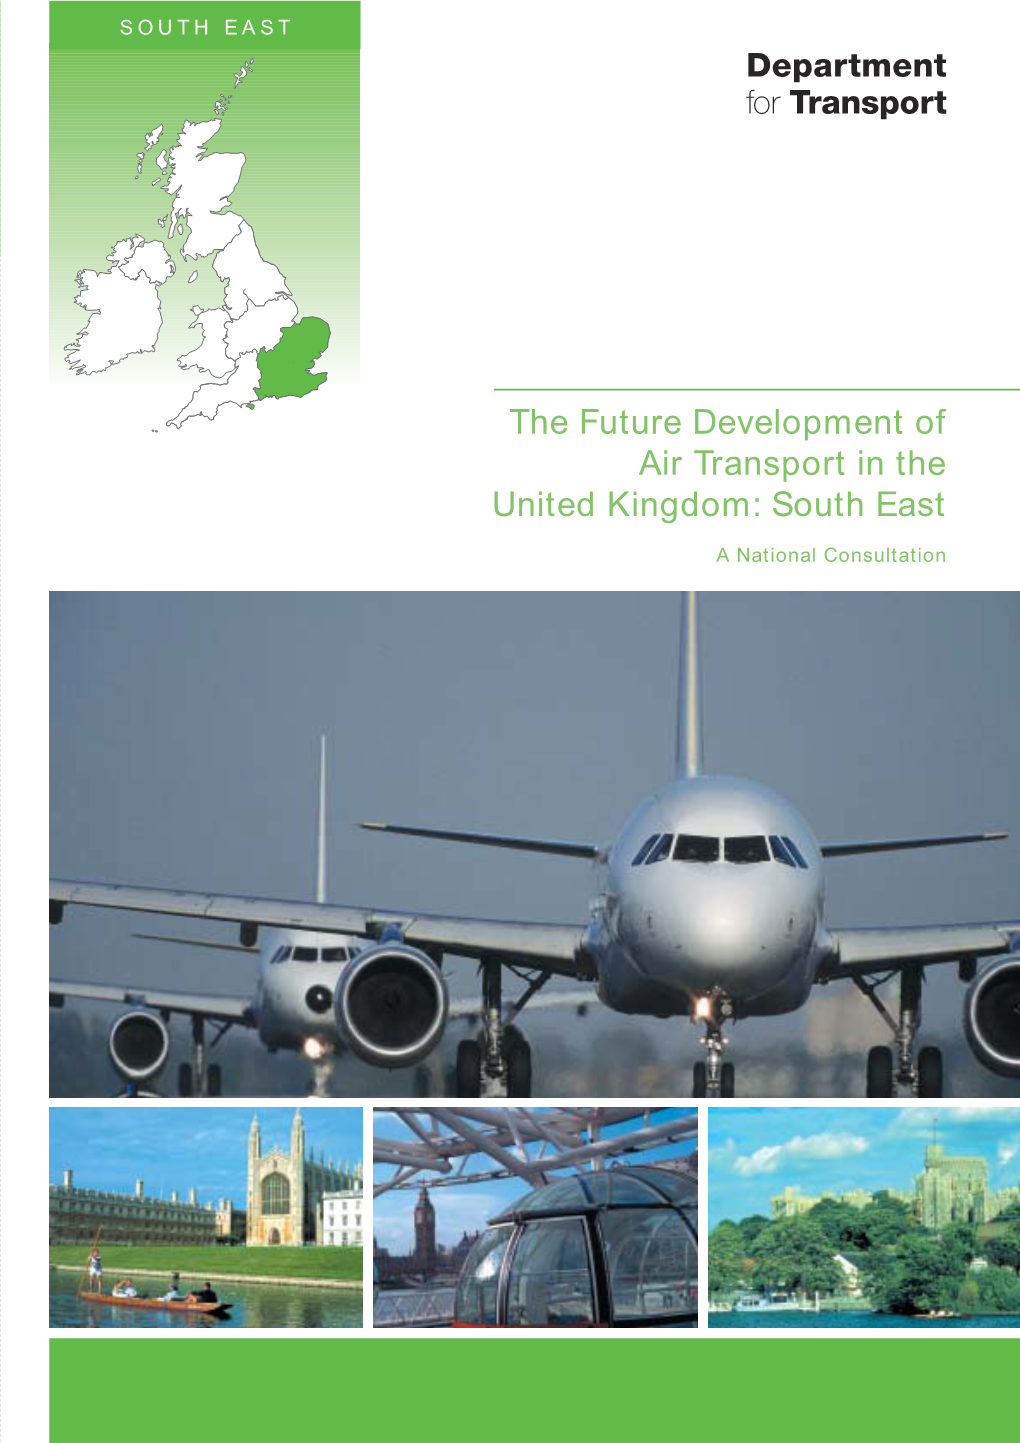 The Future Development of Air Transport in the United Kingdom: South East 1 1 MARK WAGNER from AVIATION-IMAGES.COM